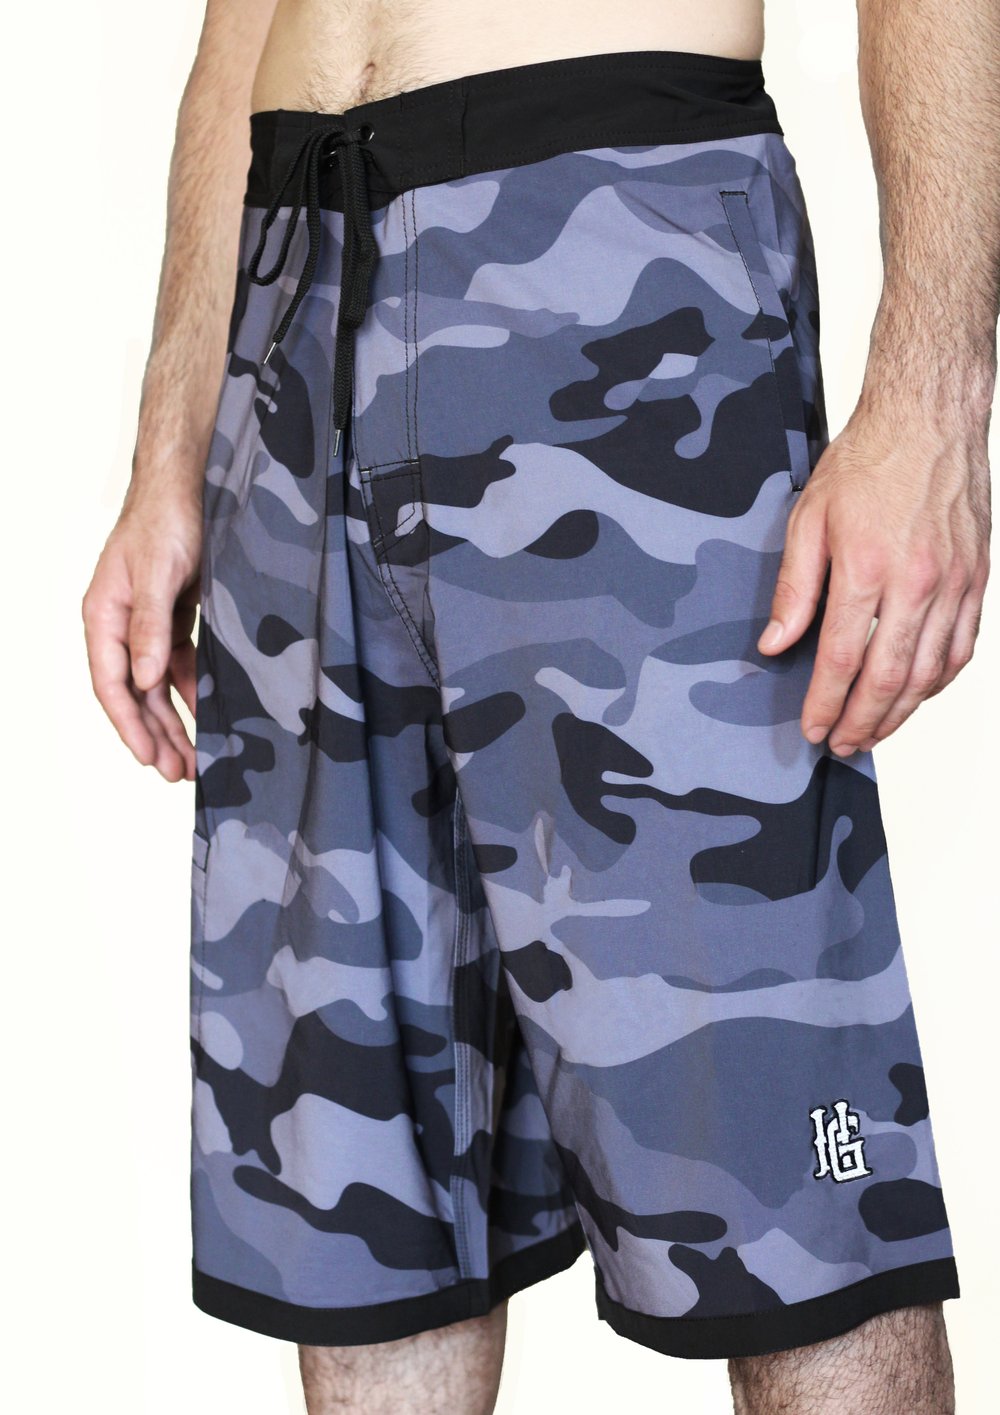 New Navy City Camo Water Proof Big and Tall Board Short